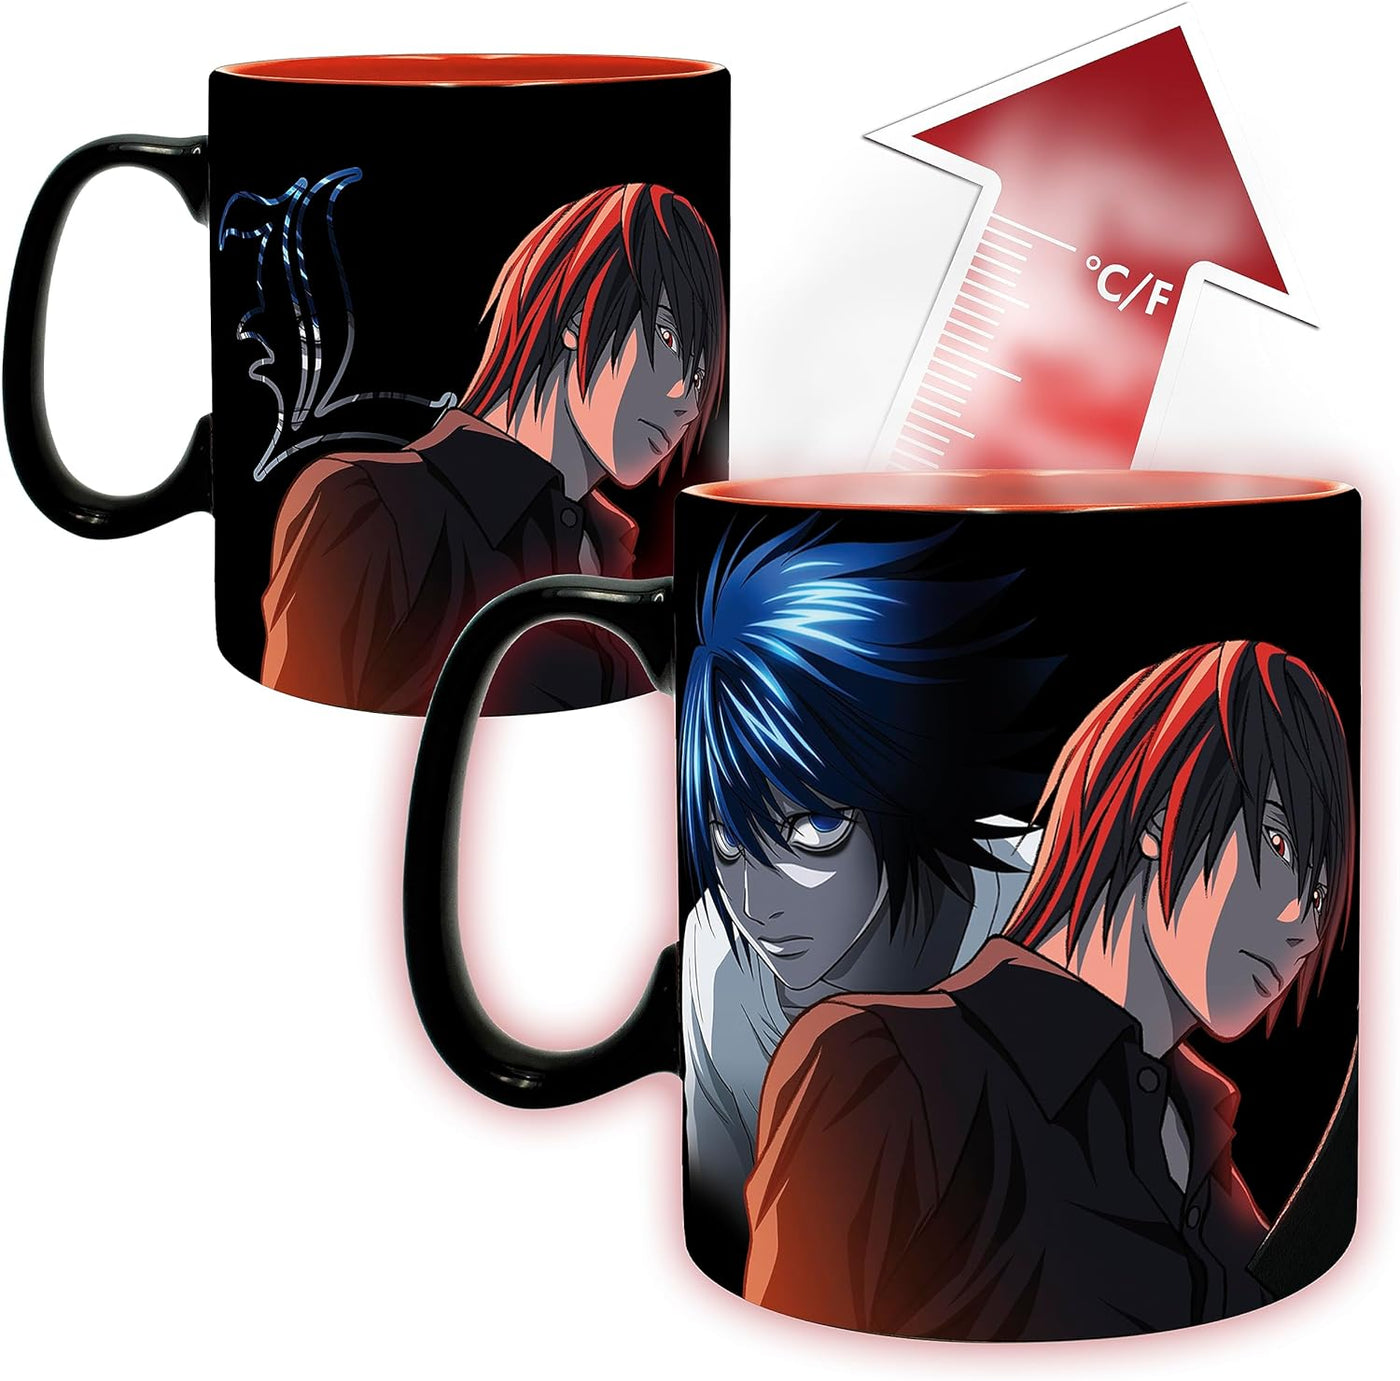 ABYSTYLE Death Note Anime and Manga Ceramic Coffee and Tea Mugs Perfect for Hot or Cold Beverages